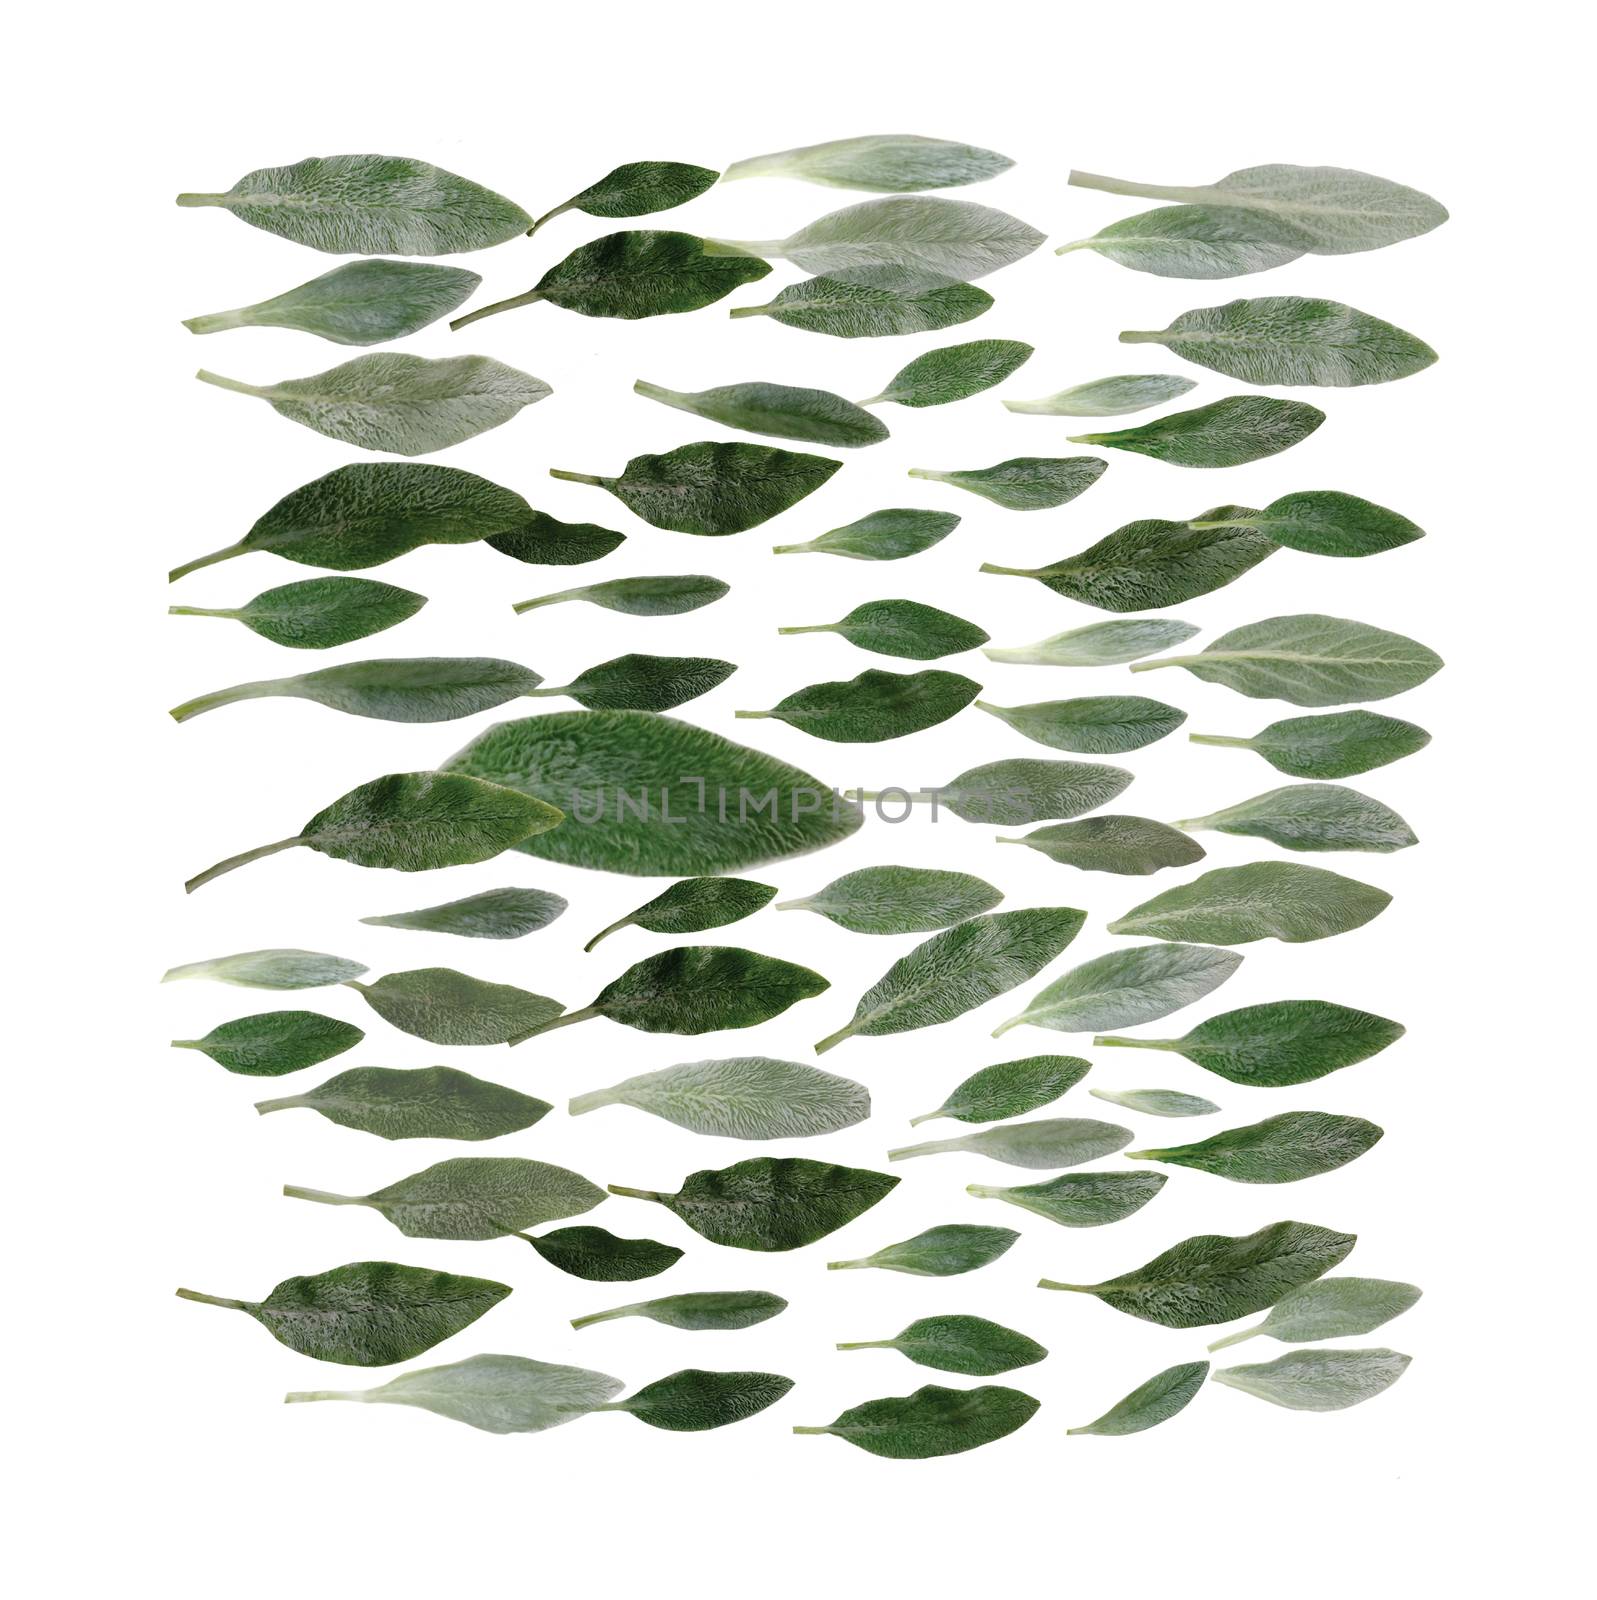 Green leaves isolated on white background. Flat lay square shape texture. 